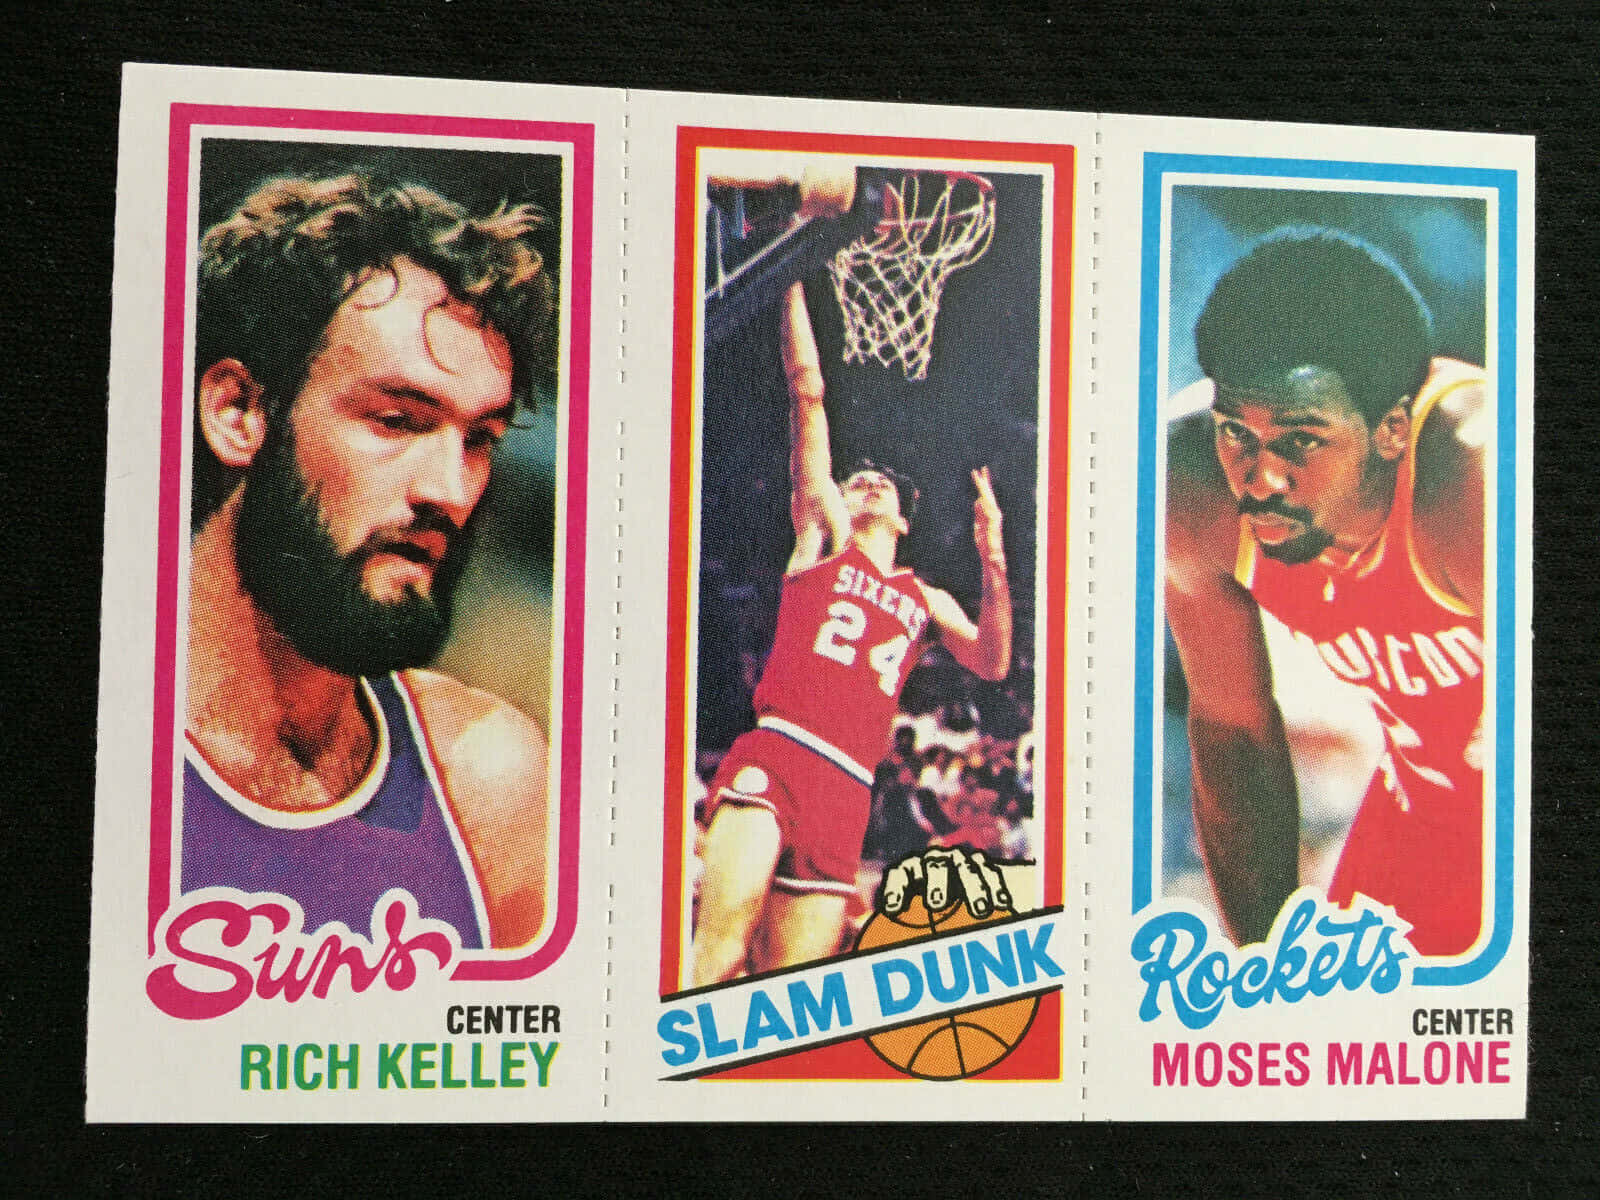 Moses Malone and Rich Kelley in a heated basketball match Wallpaper